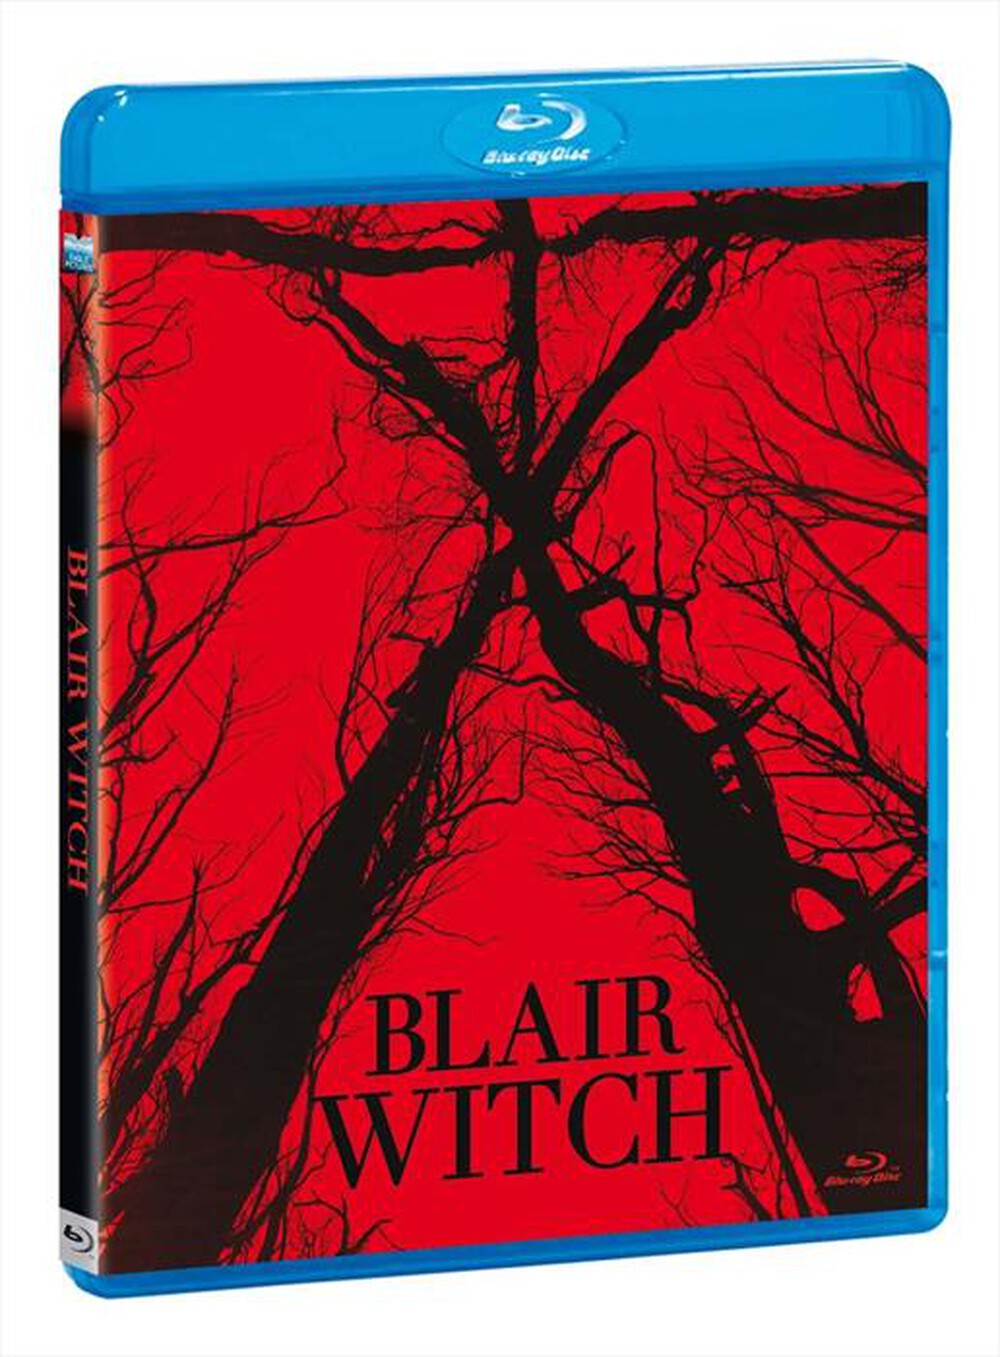 "EAGLE PICTURES - Blair Witch"